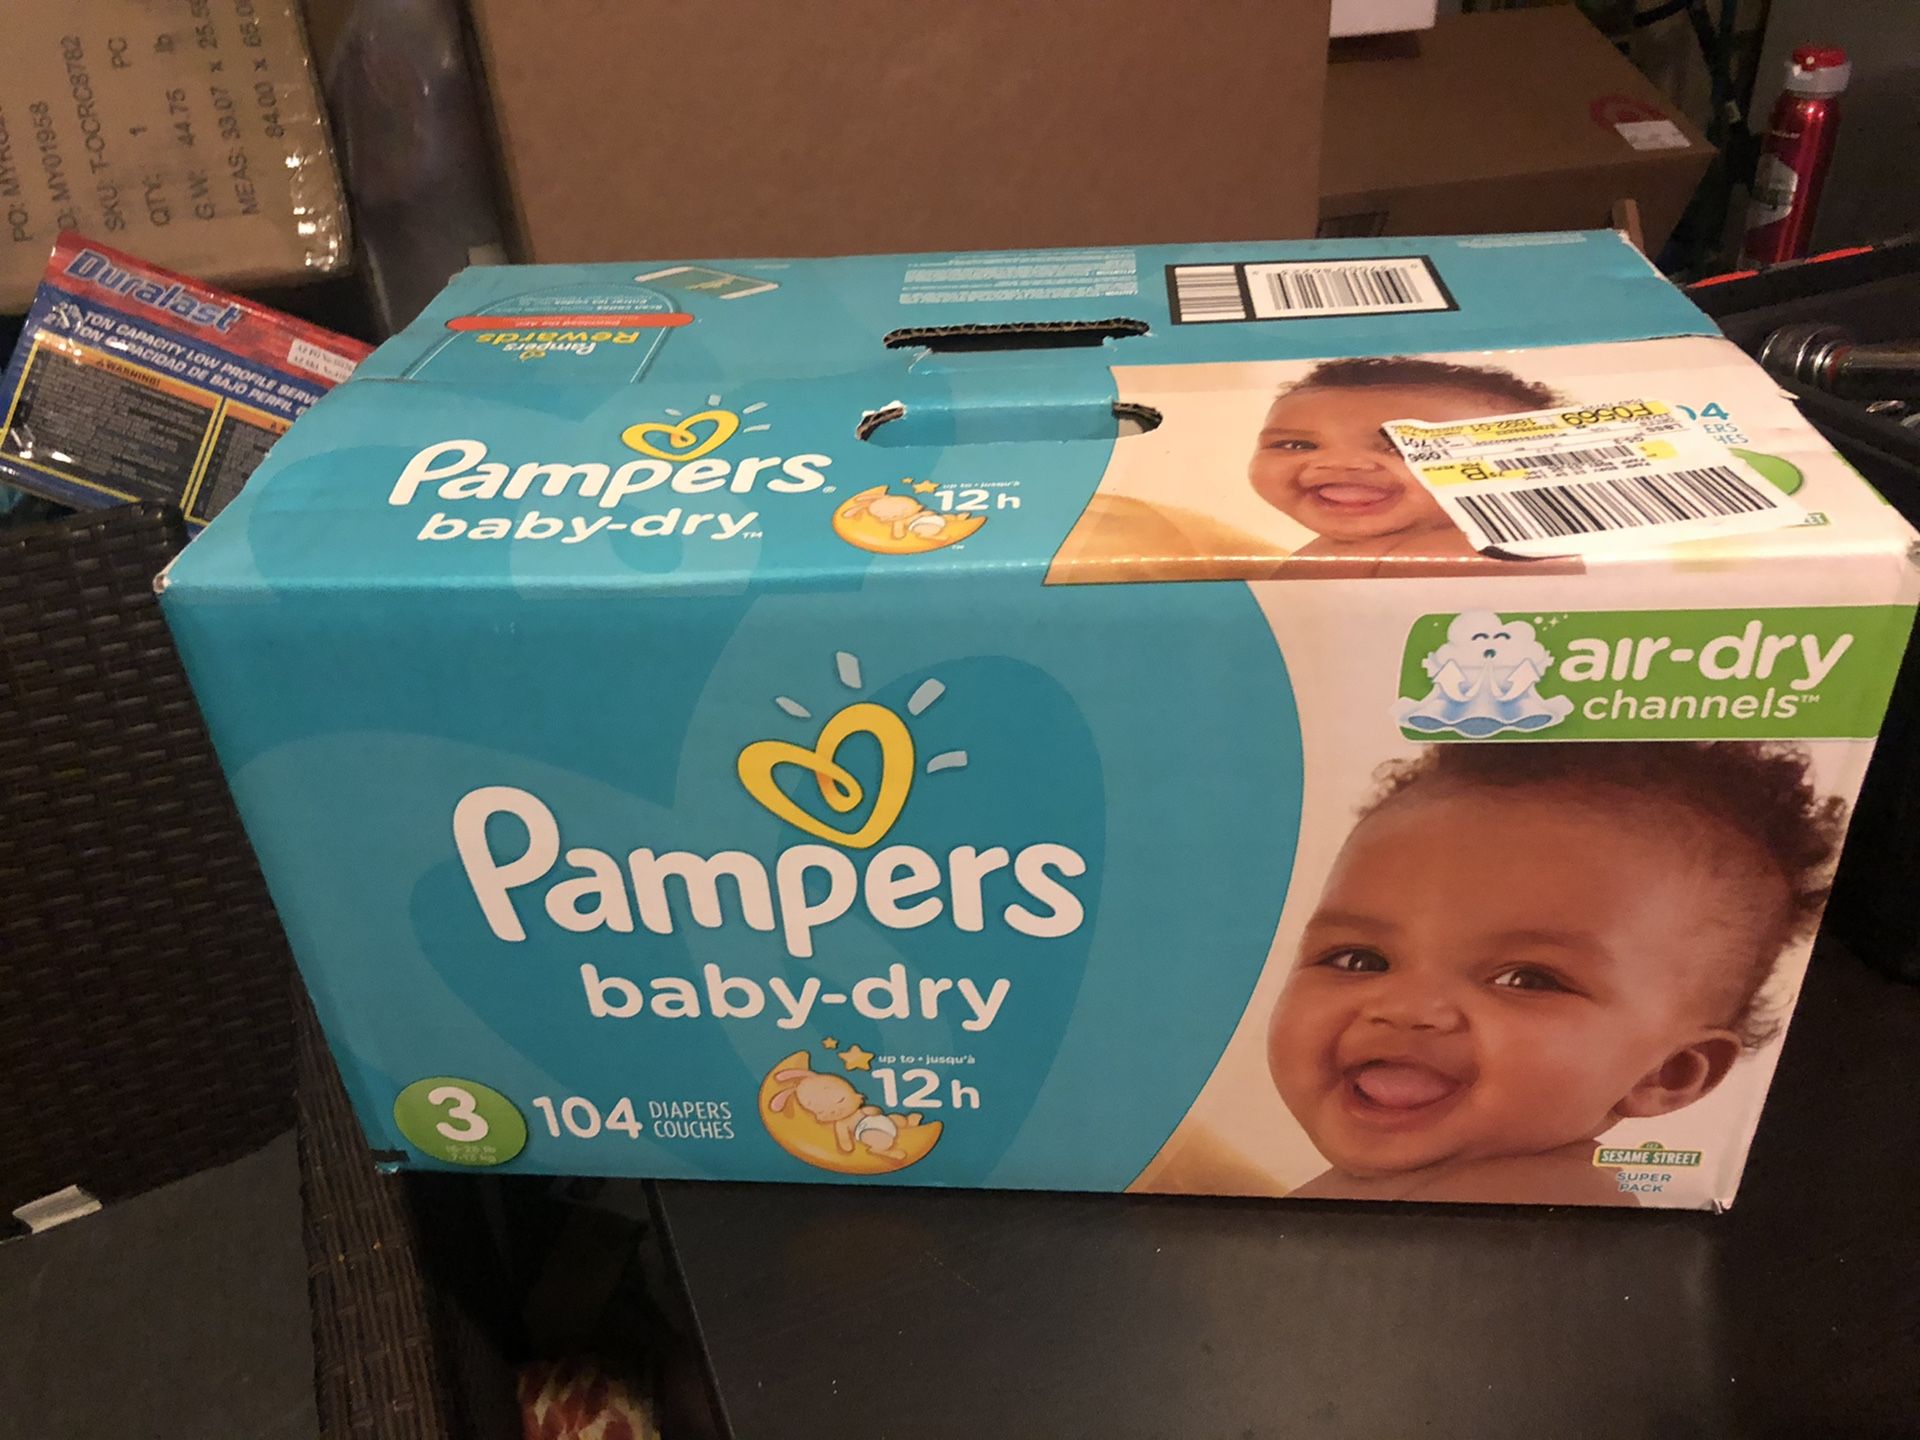 Pampers size 3